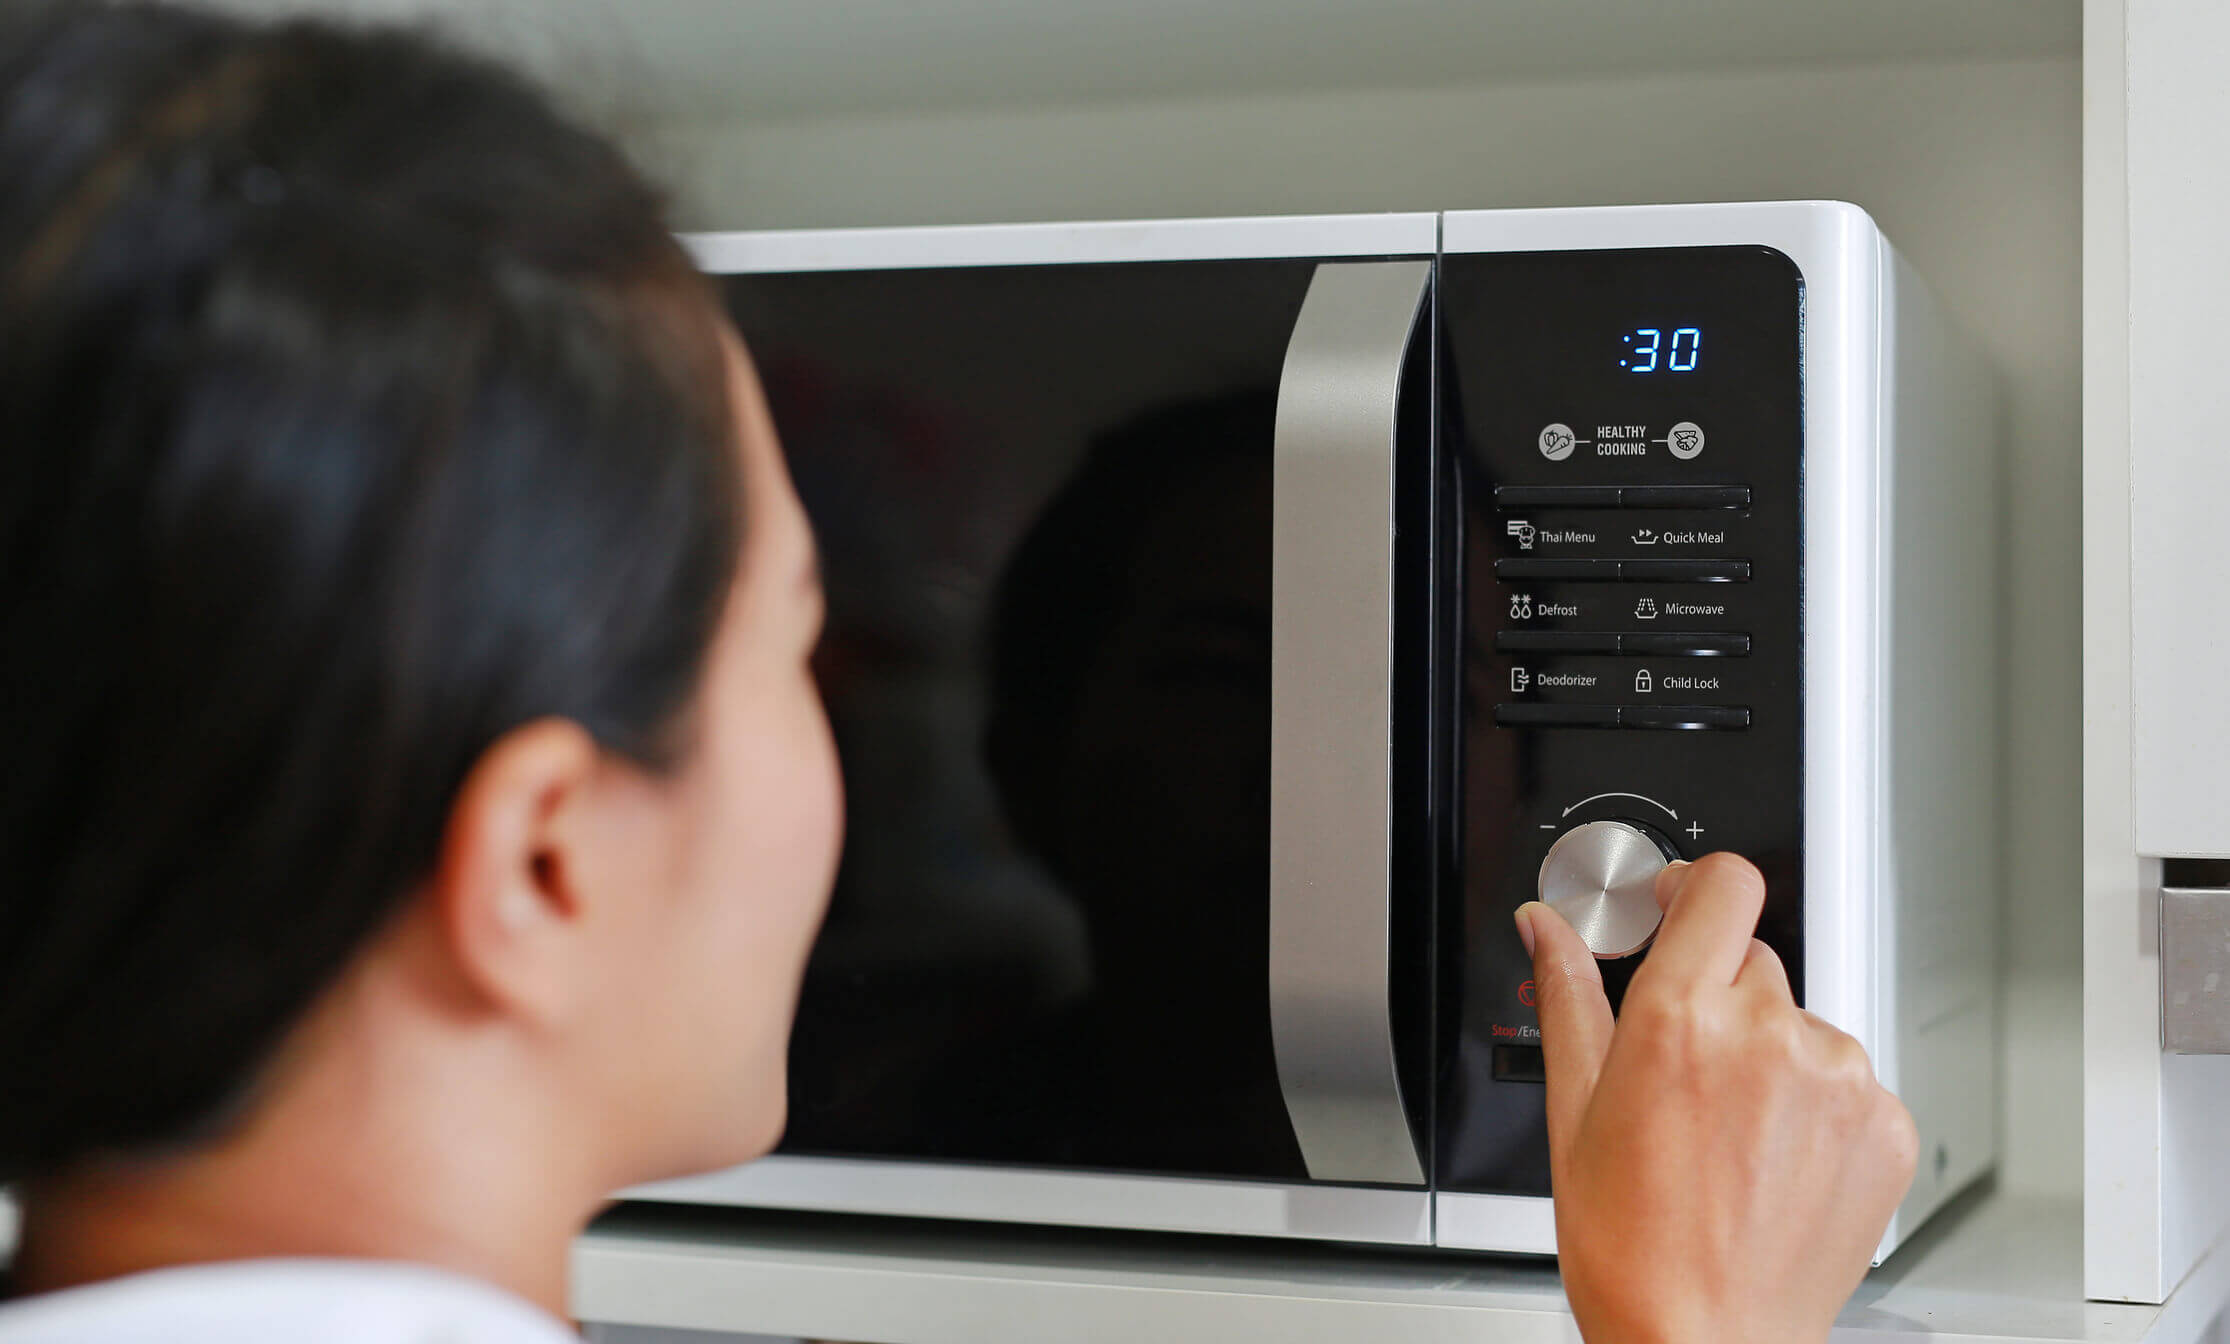 https://www.mrappliance.com/us/en-us/mr-appliance/_assets/expert-tips/images/mra-blog-10-things-that-should-never-go-in-your-microwave-3.webp